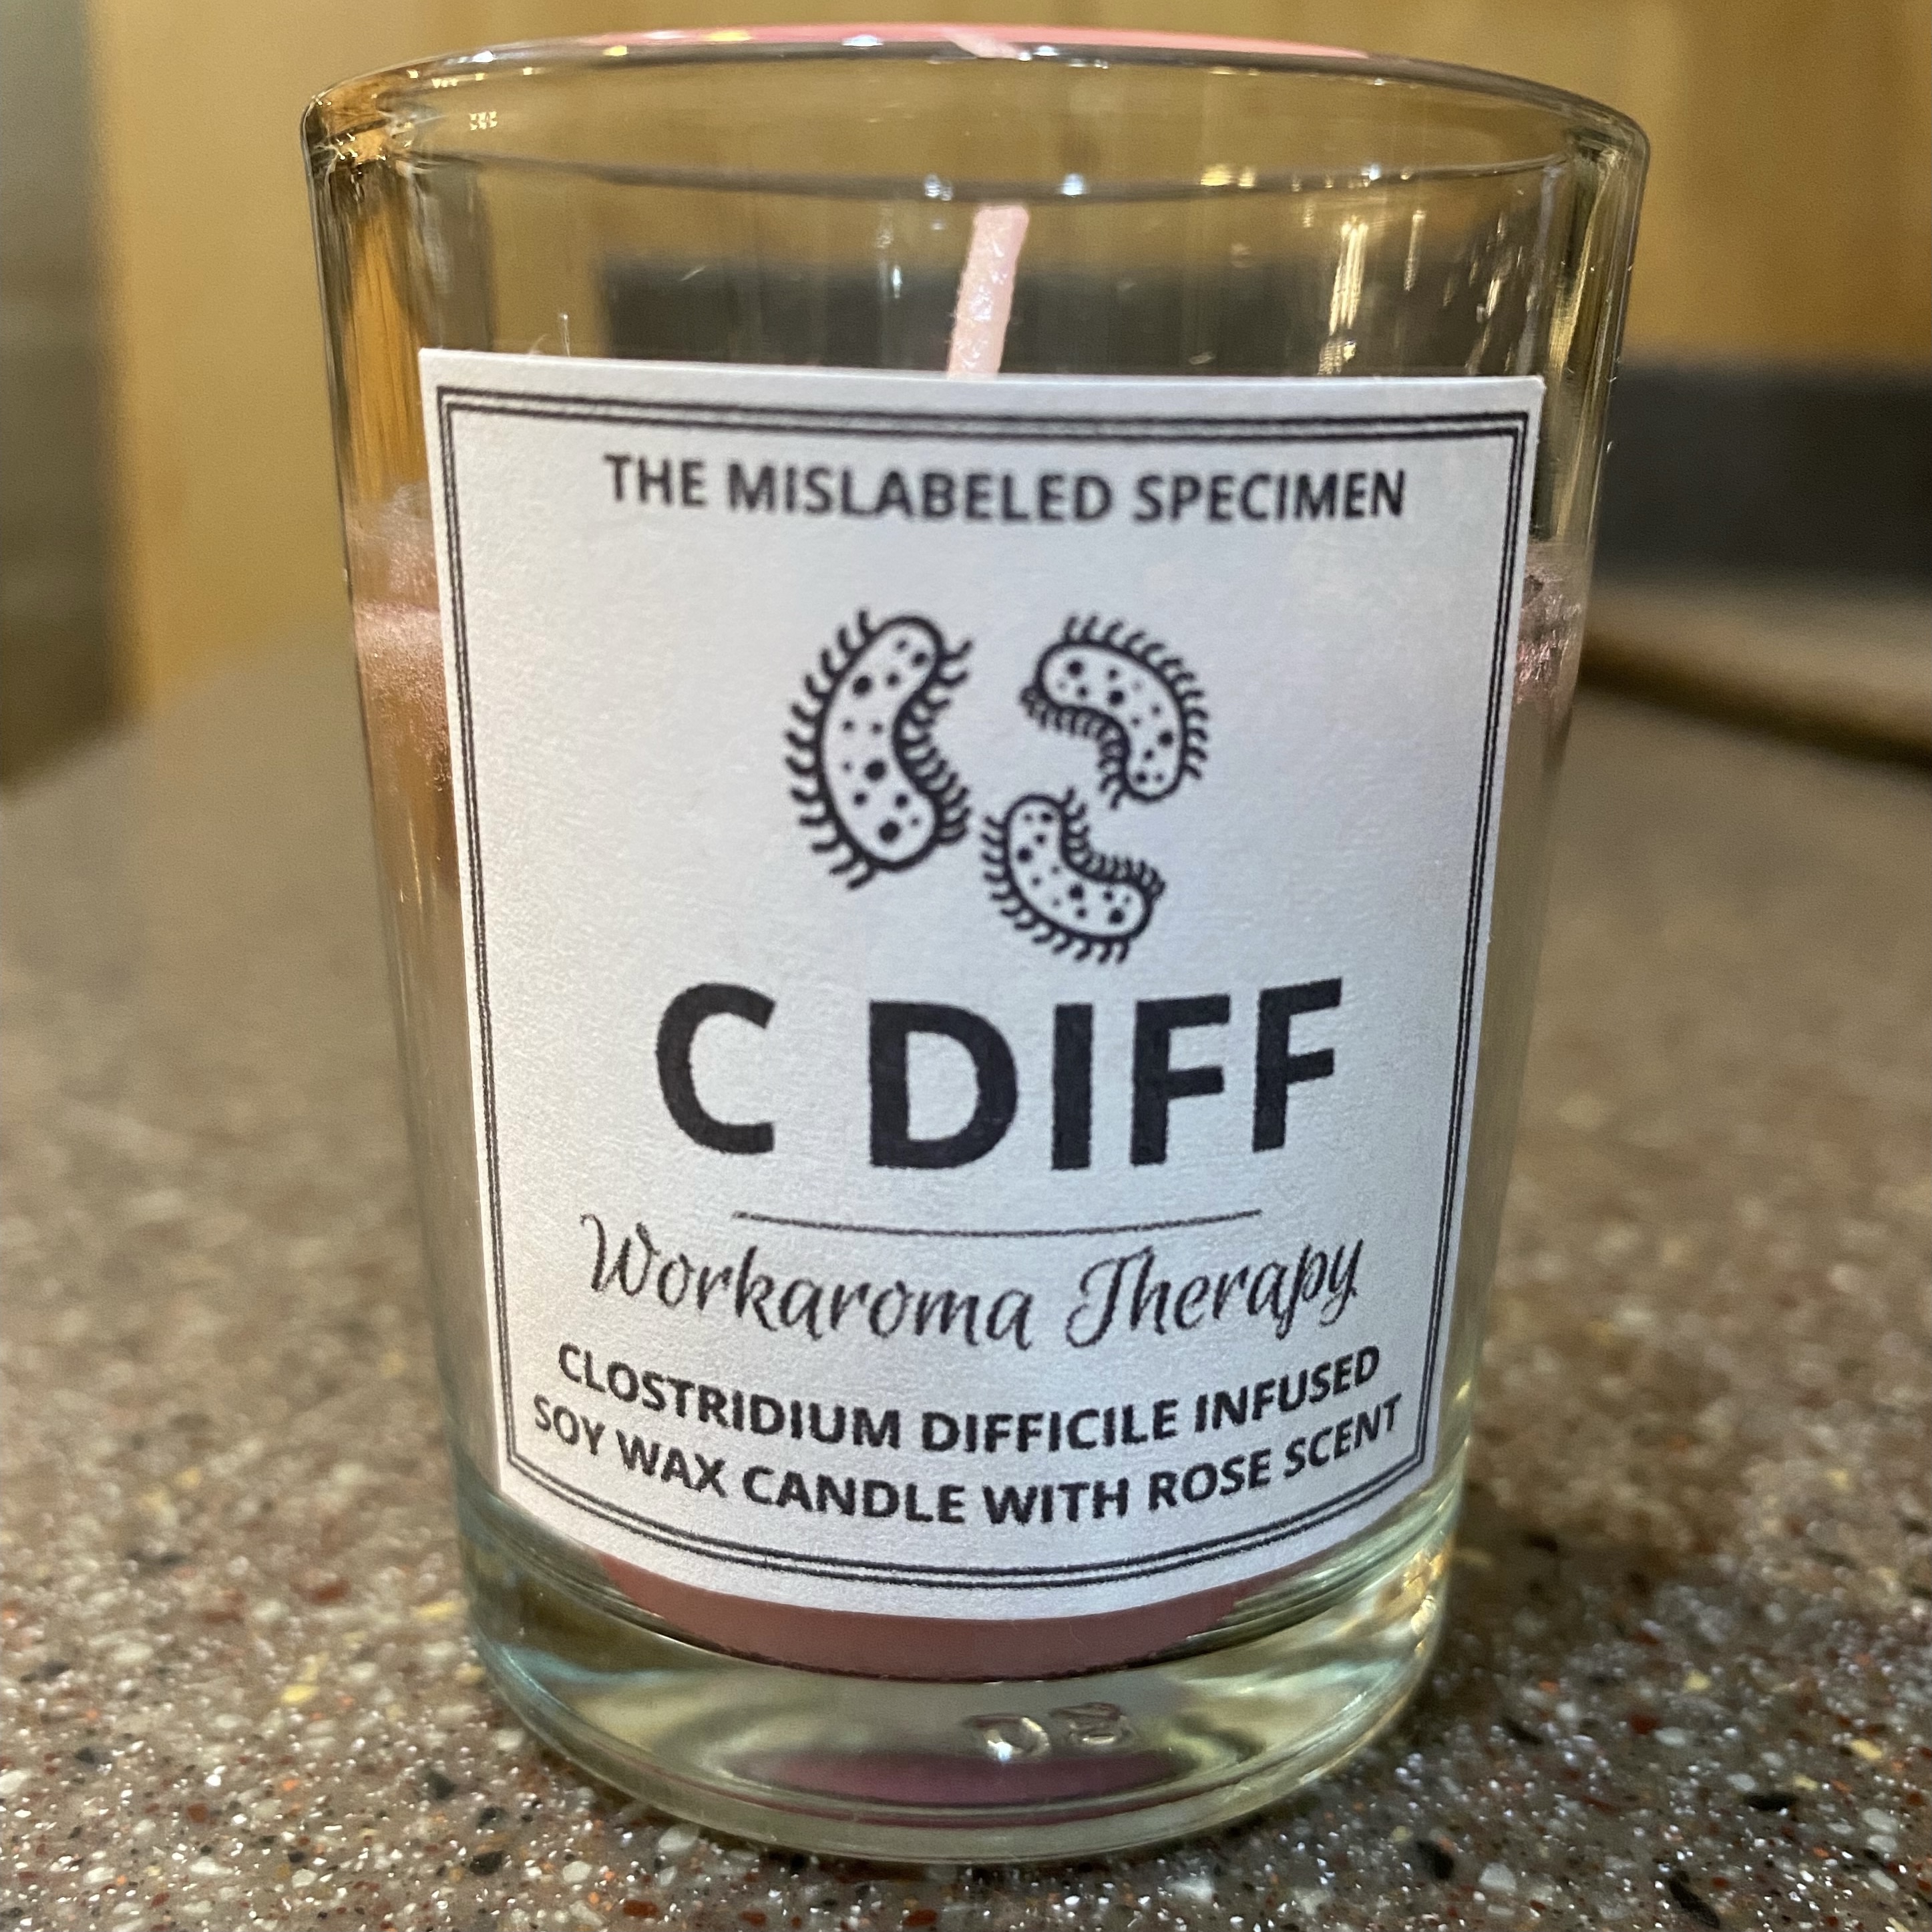 C Diff Workaroma Therapy Funny Gag Candles Soy Wax Candle with Rose Scent